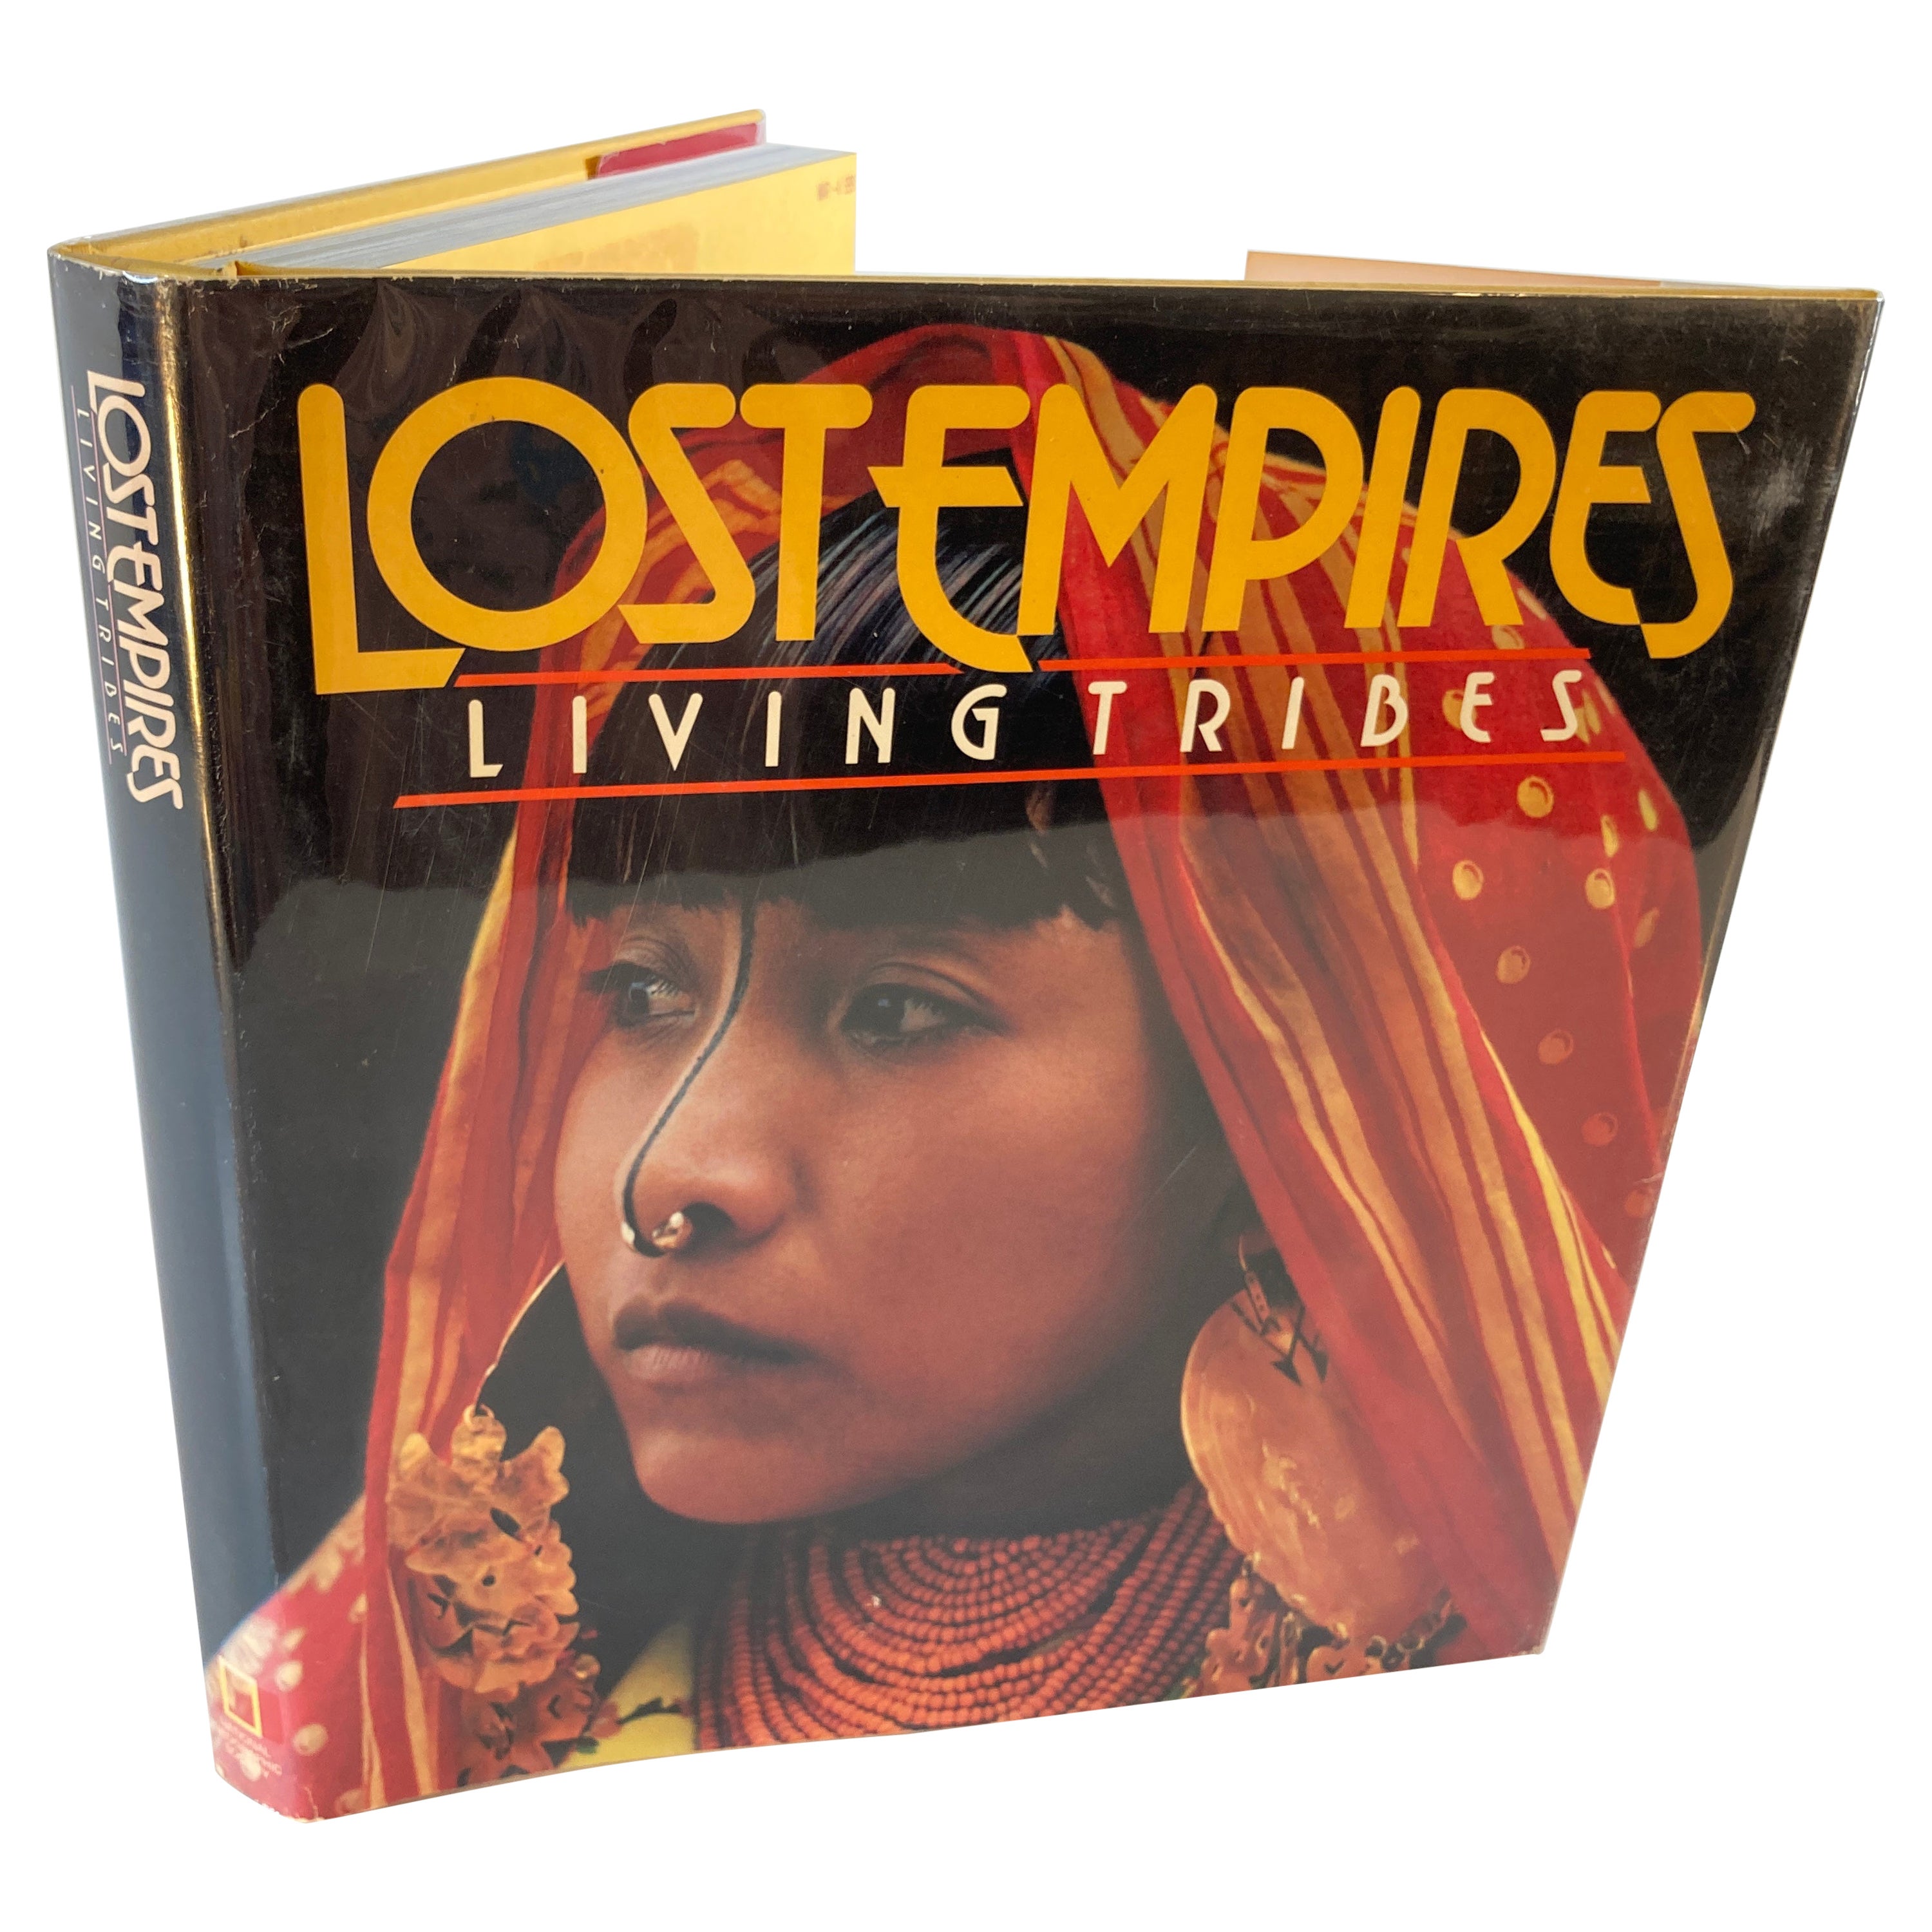 Lost Empires Living Tribes by Ross S. Bennett Art Book For Sale